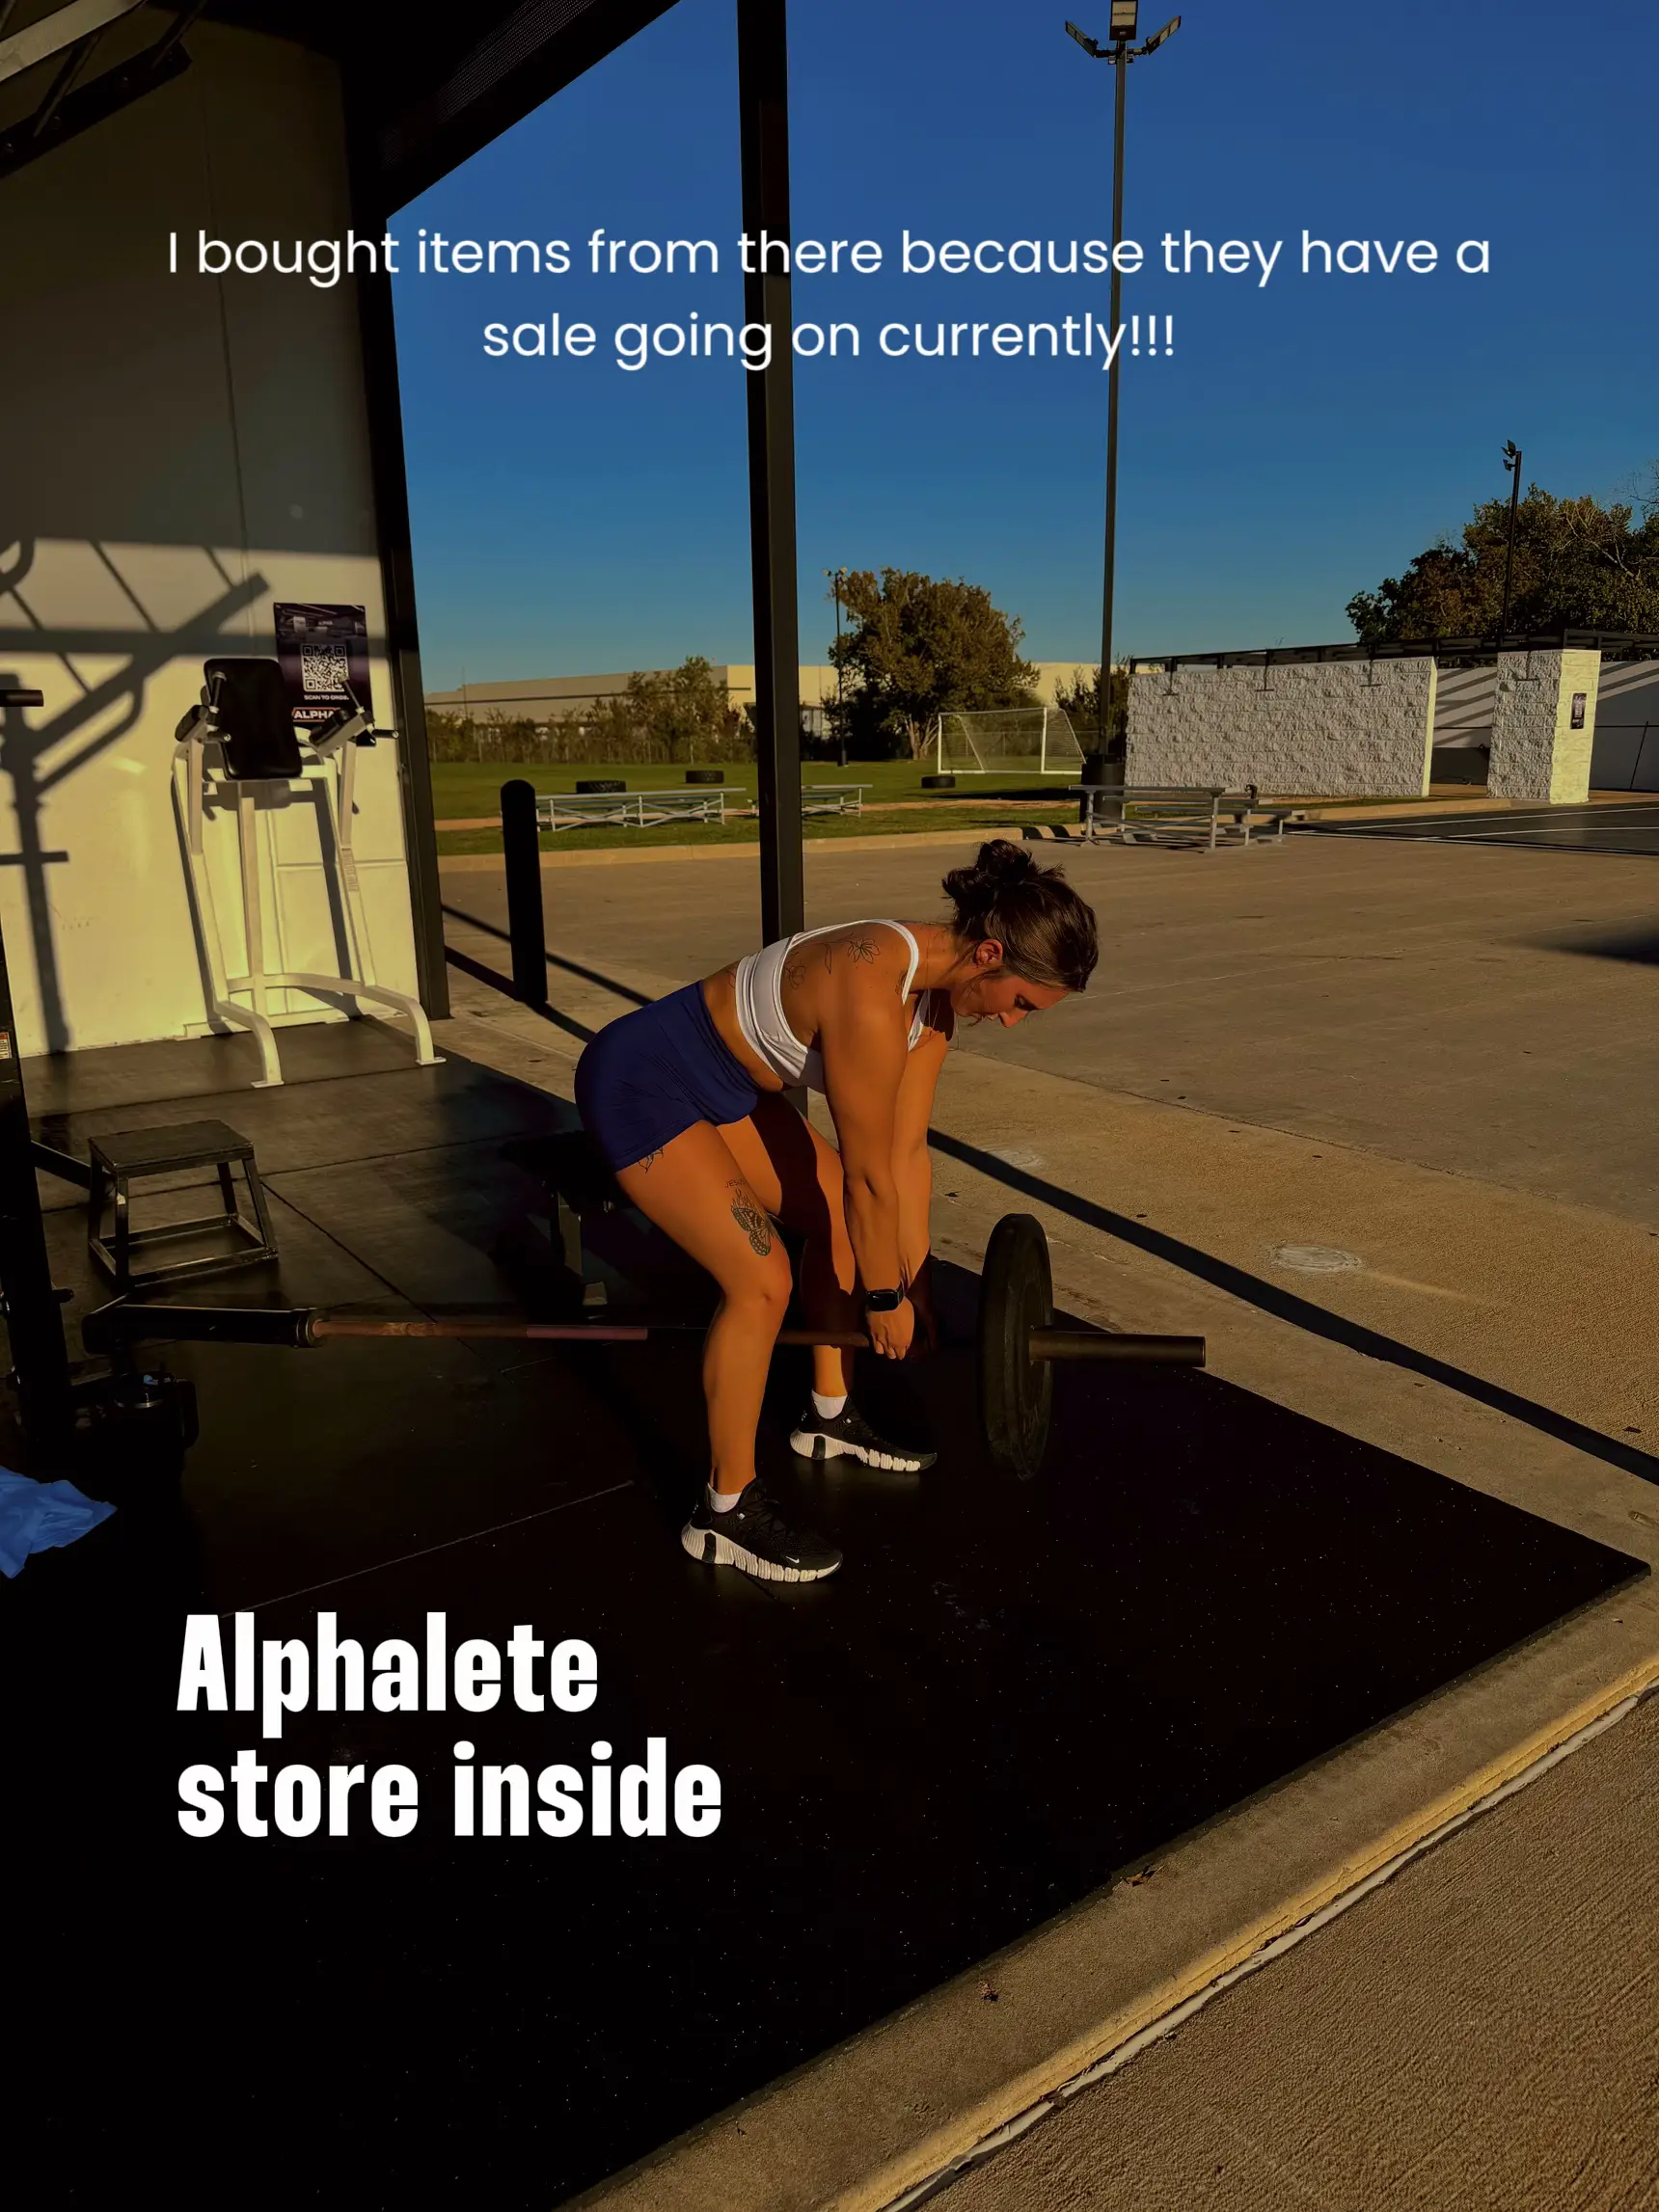 A Titan's Tale: The Journey of Alphalete and Alphaland in the Fitness Realm  - Gymfluencers